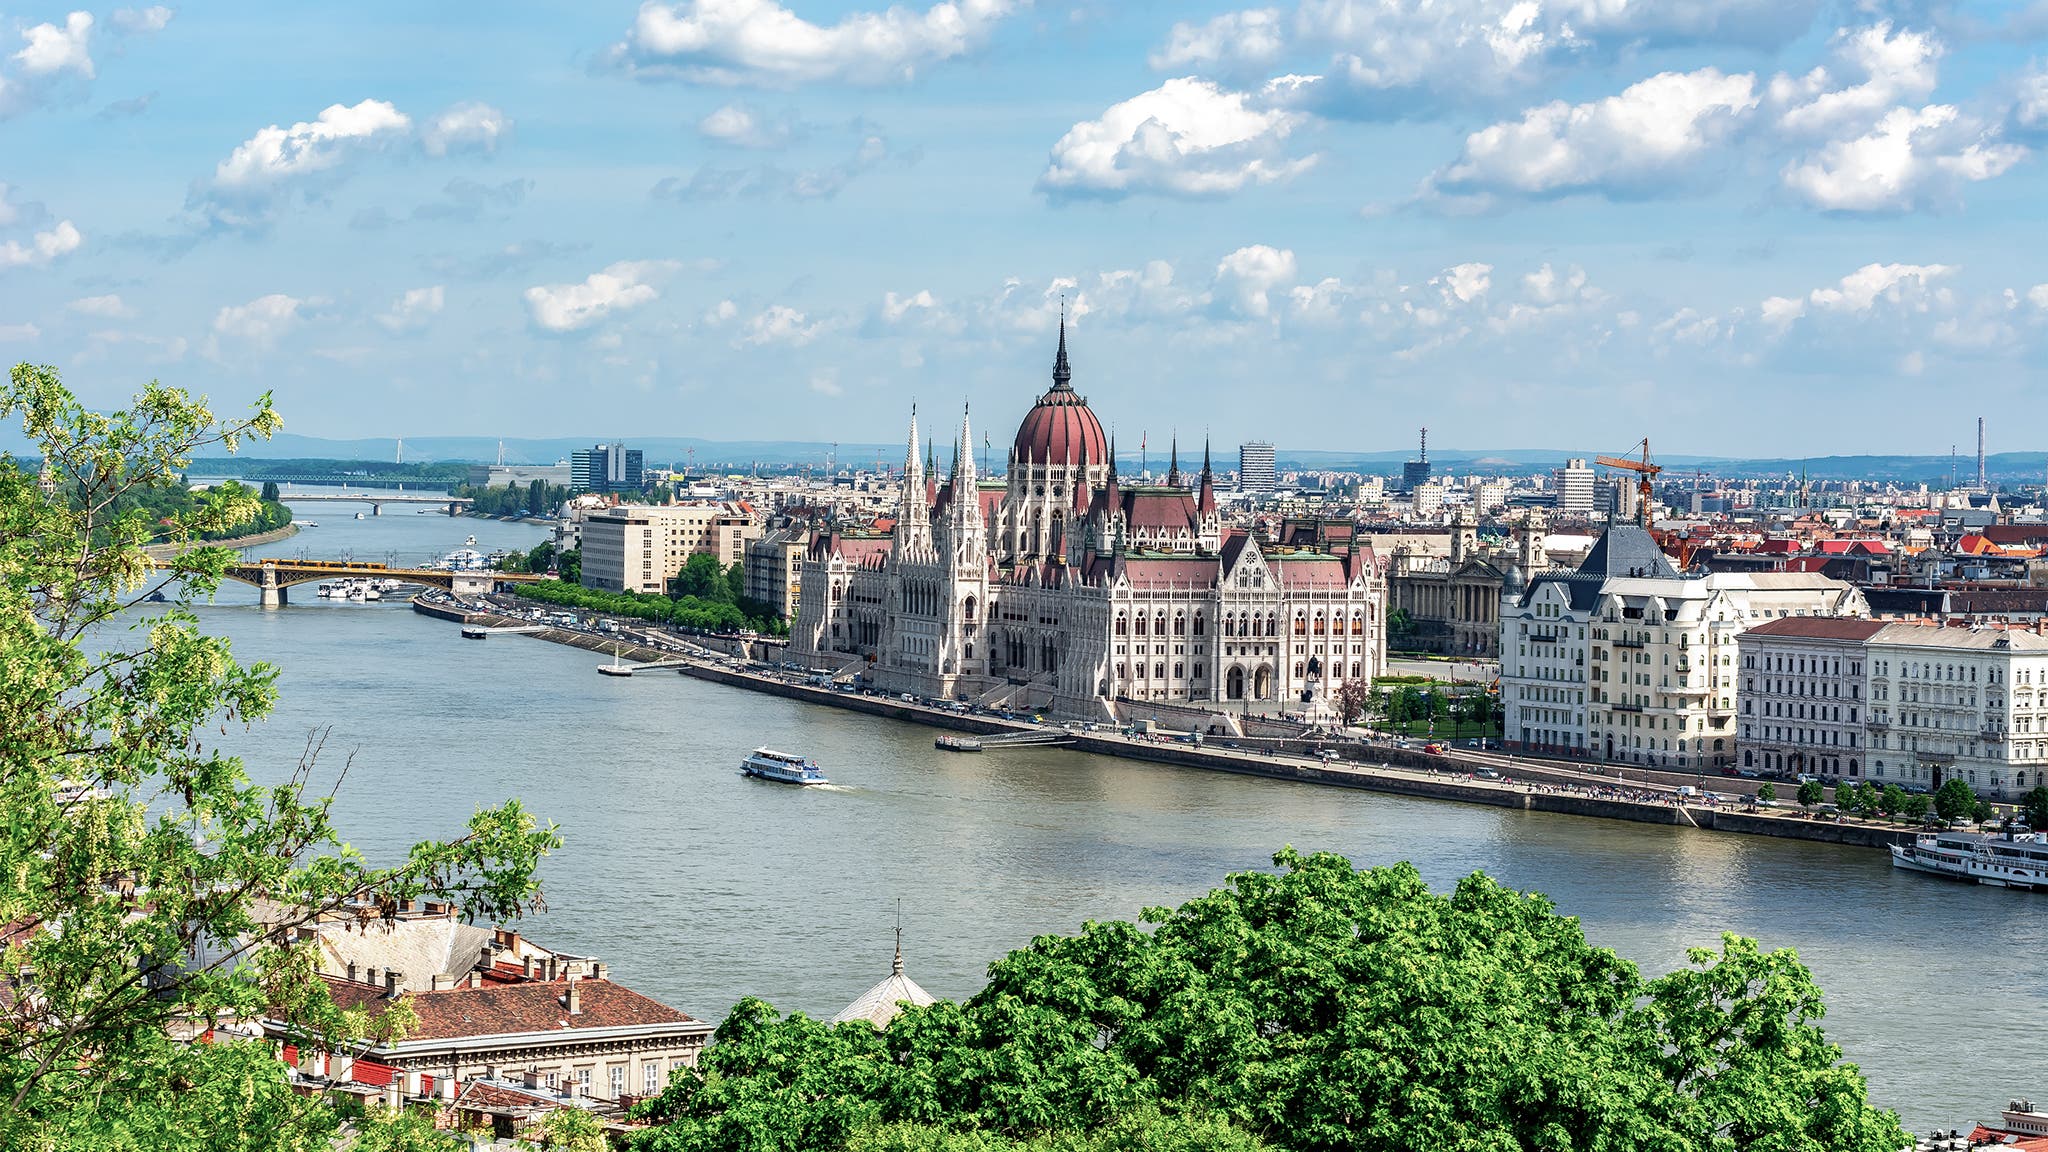 Budapest cityscape with Hungarian parliament building and Danube river, Hungary